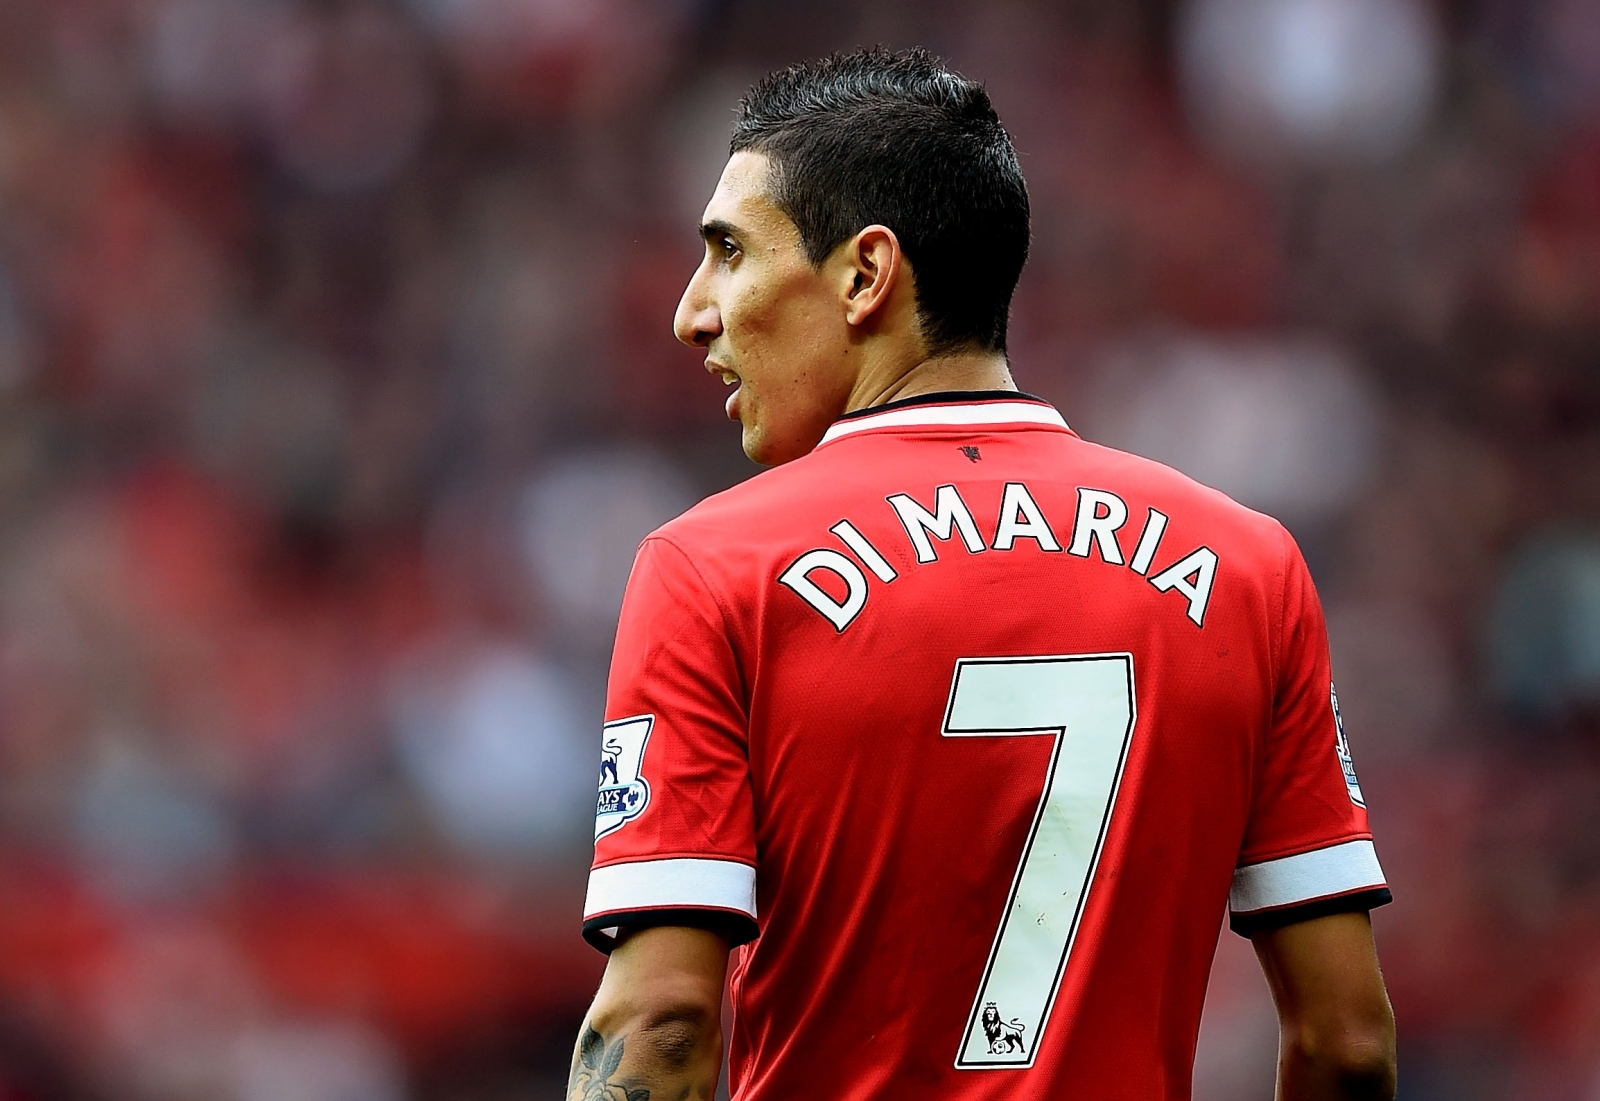 Angel di Maria at Manchester United: Where did it all go wrong?1600 x 1101